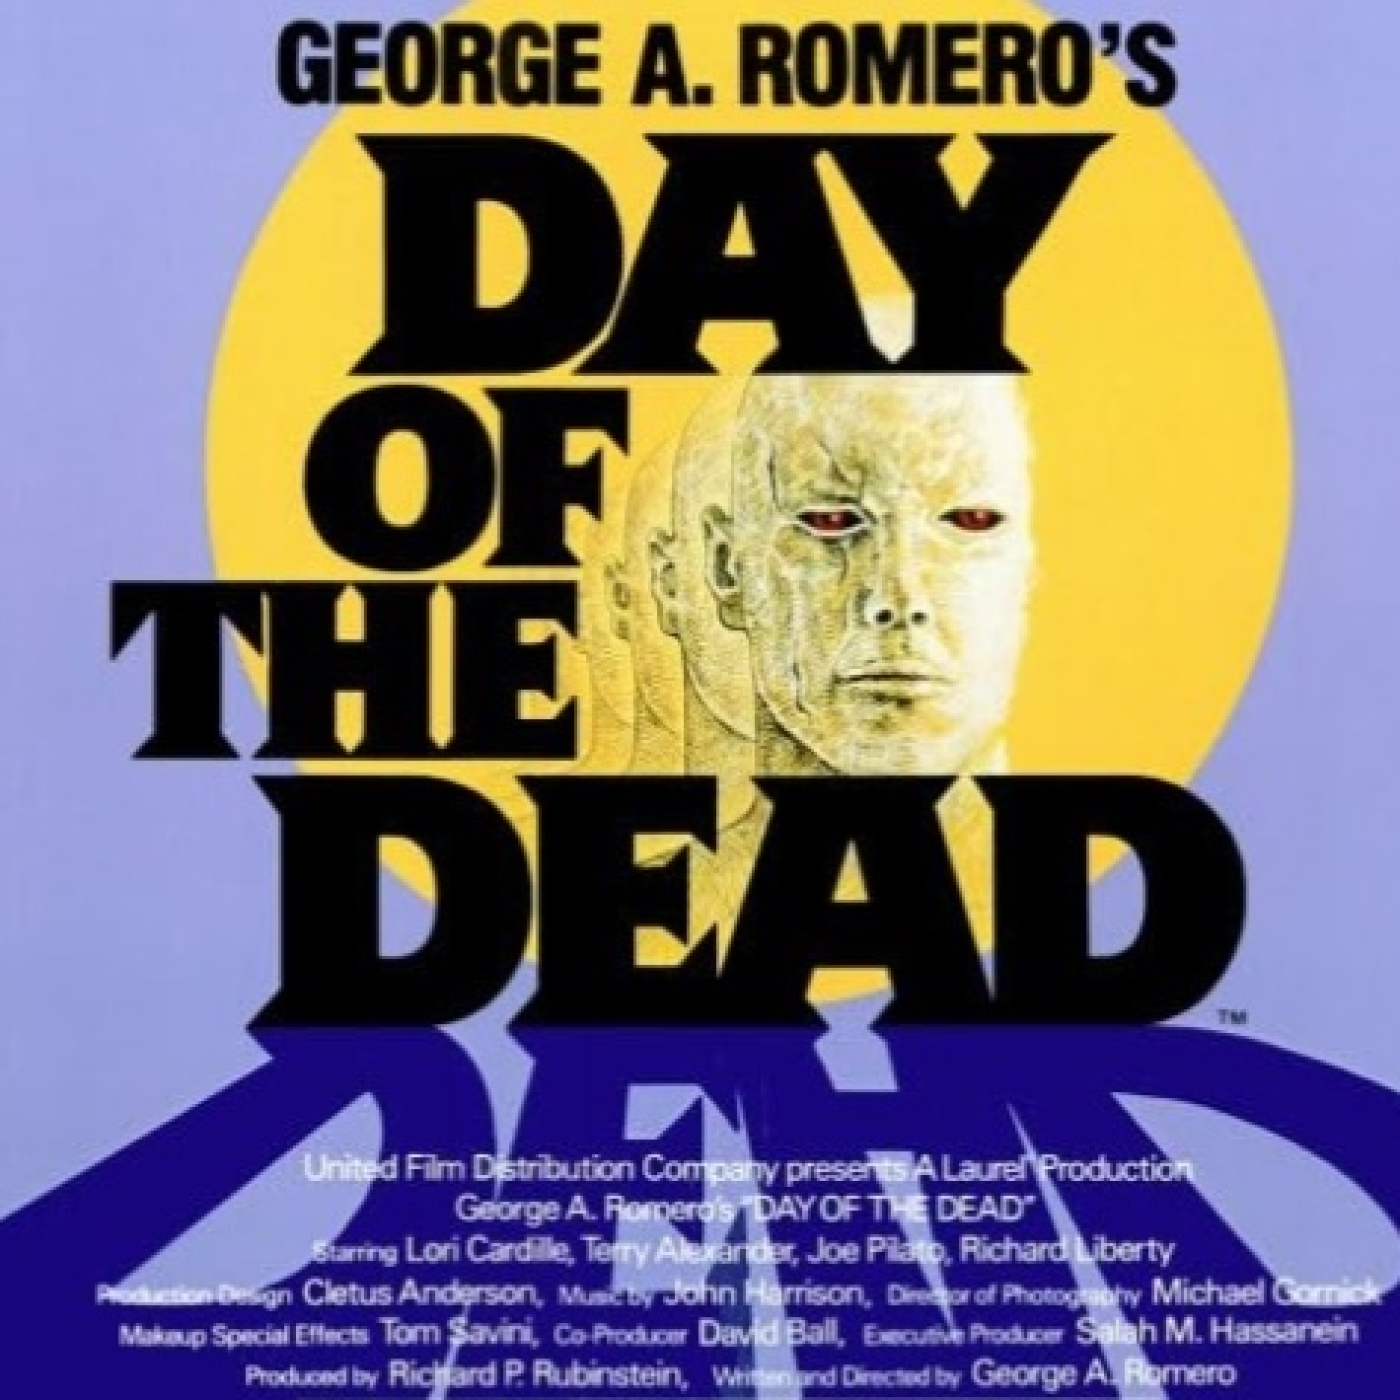 3x18.-Day of the Dead - 1985